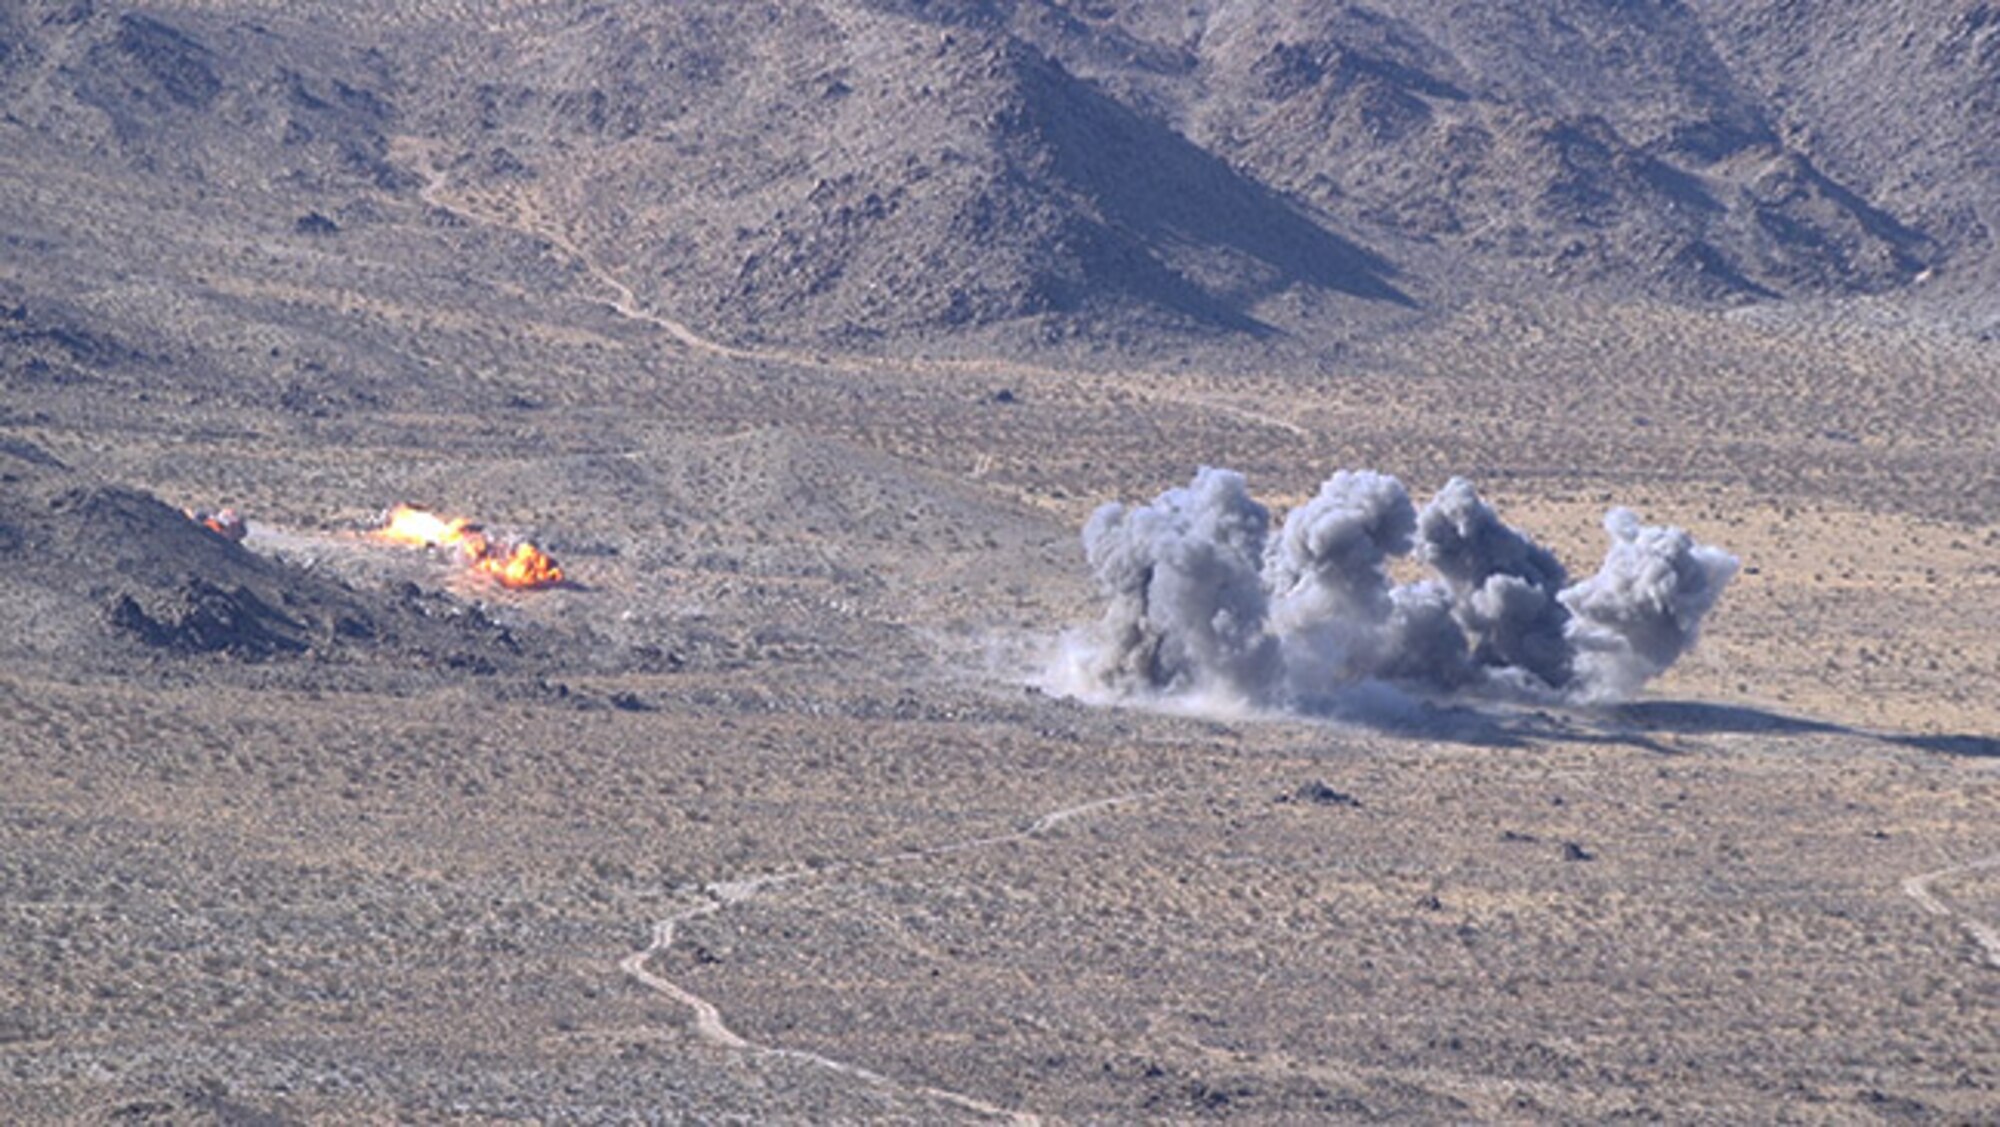 Live-bombs delivered by aircraft from the guidance of 93d Air Ground Operations Wing Joint Terminal Attack Controllers, explode on a simulated battlefield during a rotation at Ft. Irwin, California’s, National Training Center, Feb. 22, 2018. During the month-long rotation, 93d Air Ground Operations Wing units embedded with approximately 4,000 soldiers in the largest force-on-force live-fire exercise in the world. The 93d AGOW provided tactical air control party support to enhance interoperability for major combat operations downrange. (U.S. Air Force photo by Senior Airman Greg Nash)